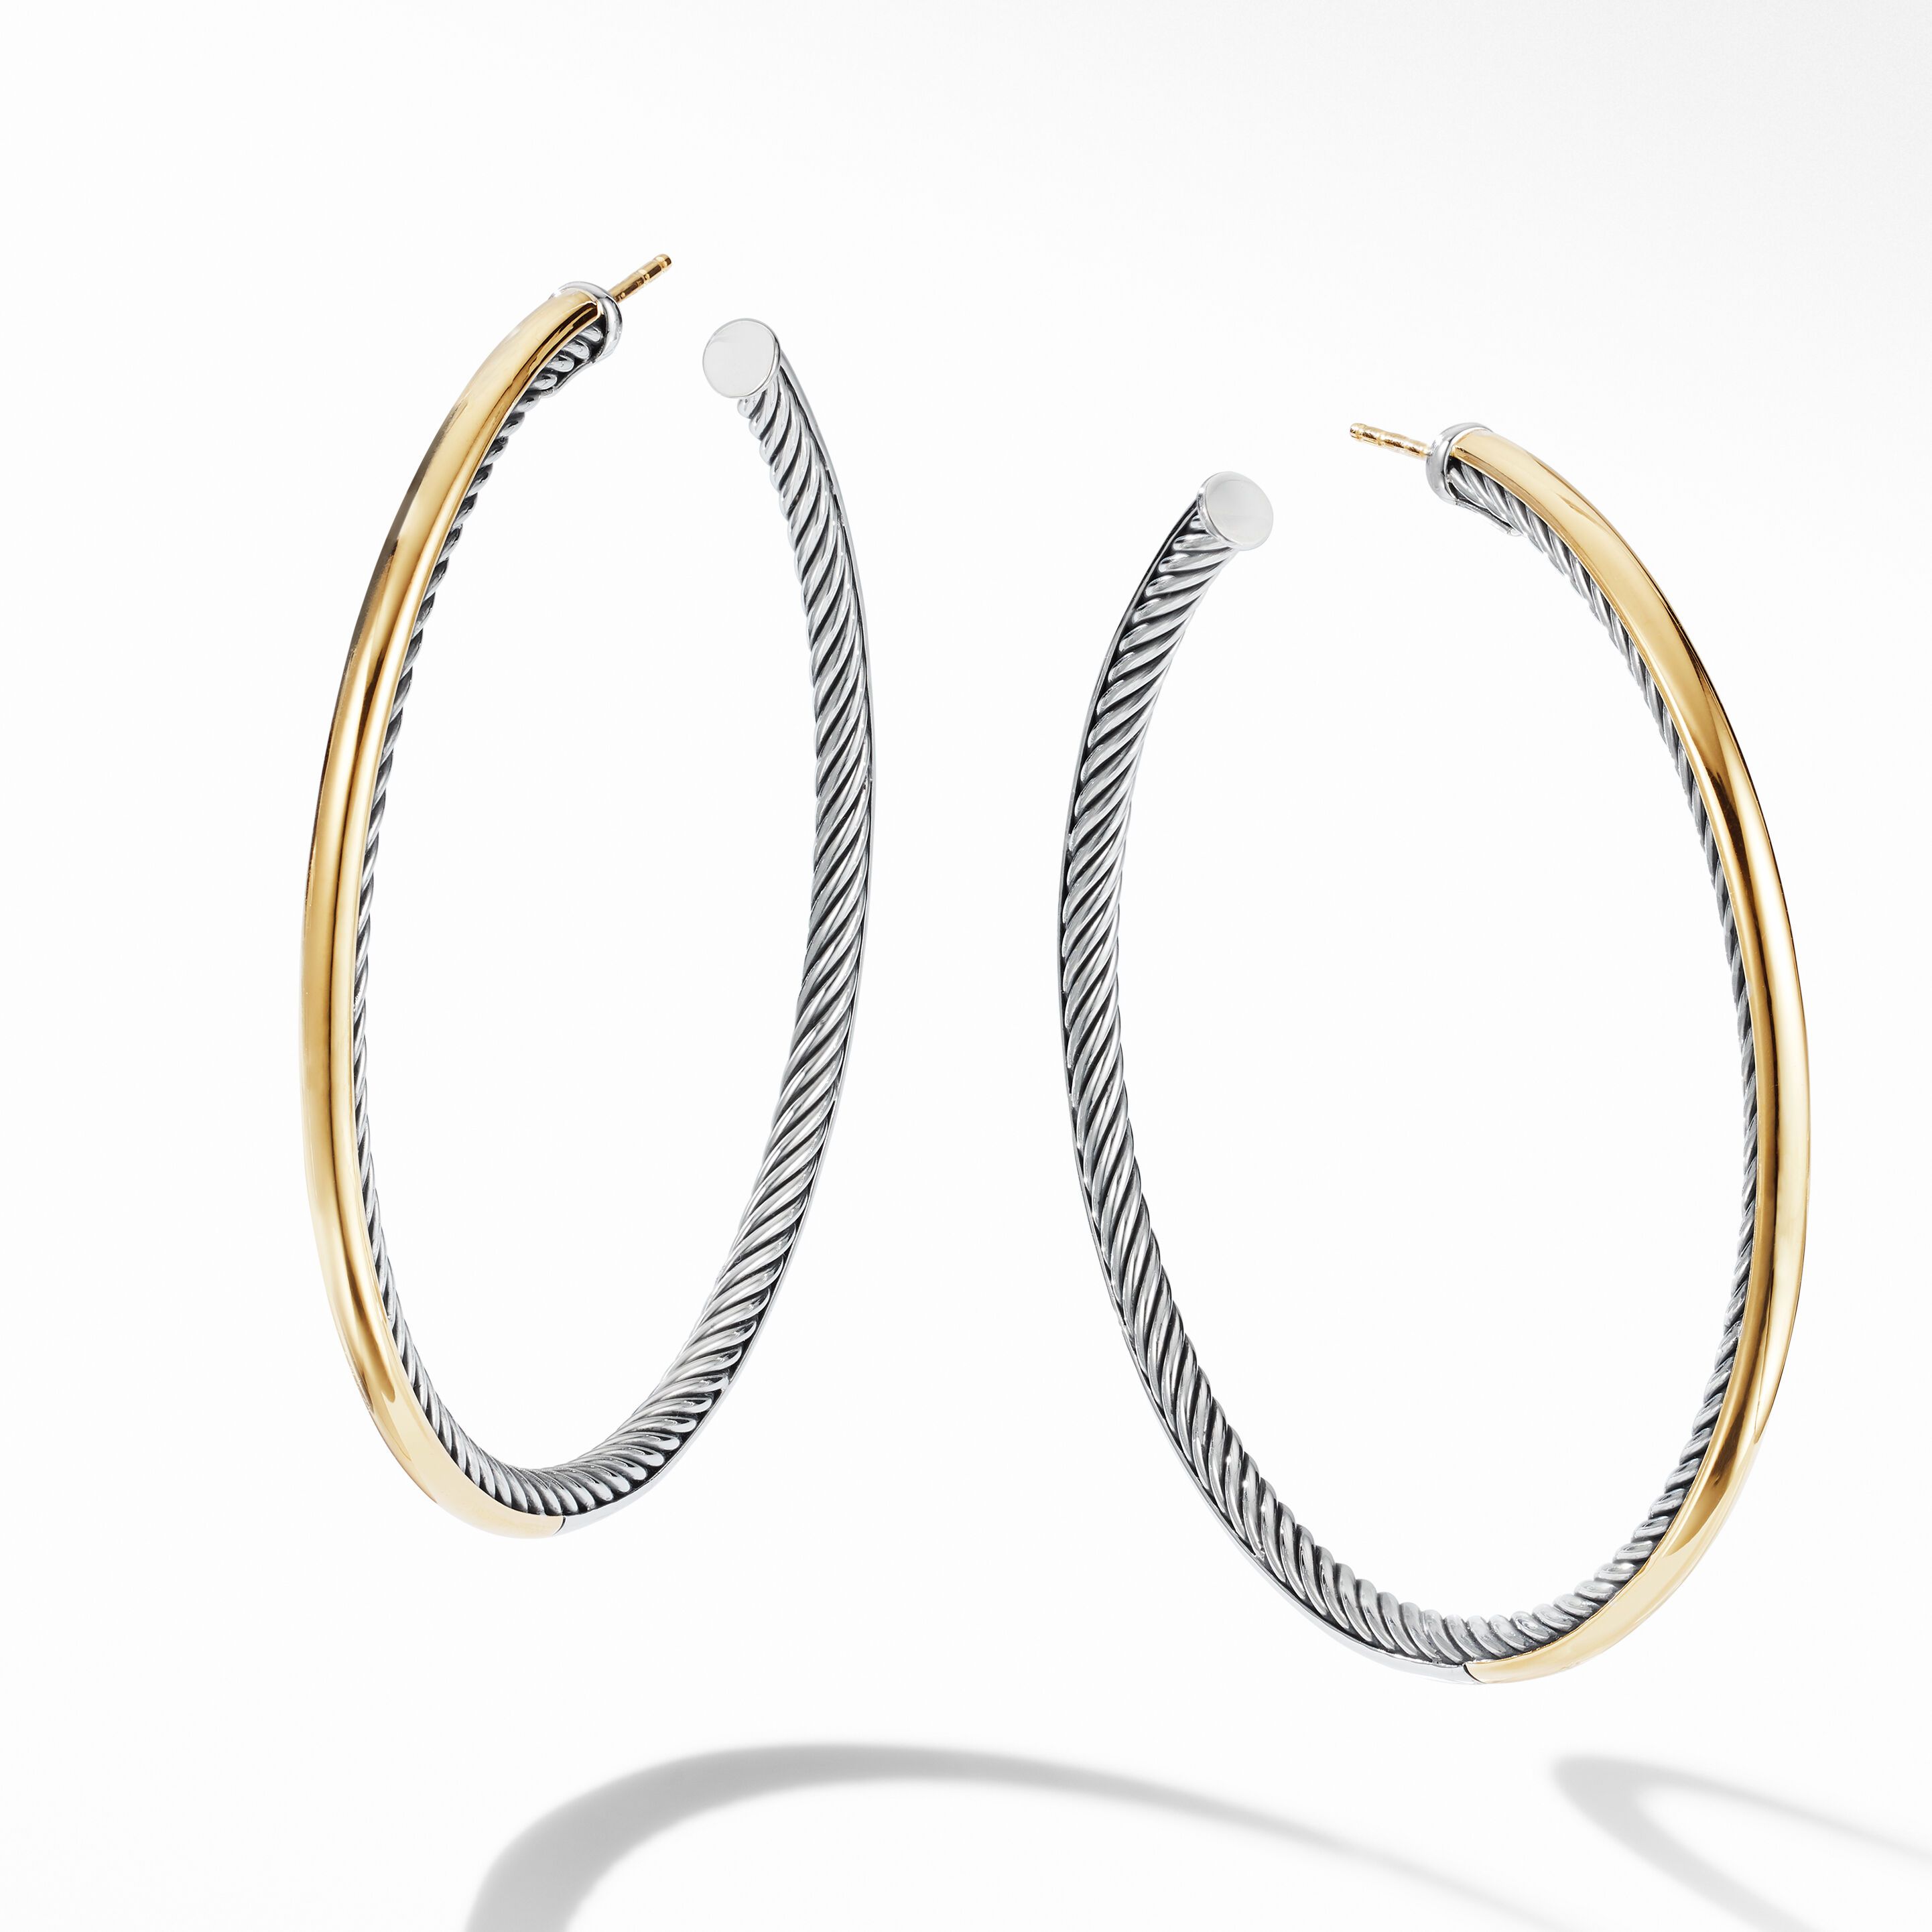 Sculpted Cable Collection
for
Women | David Yurman